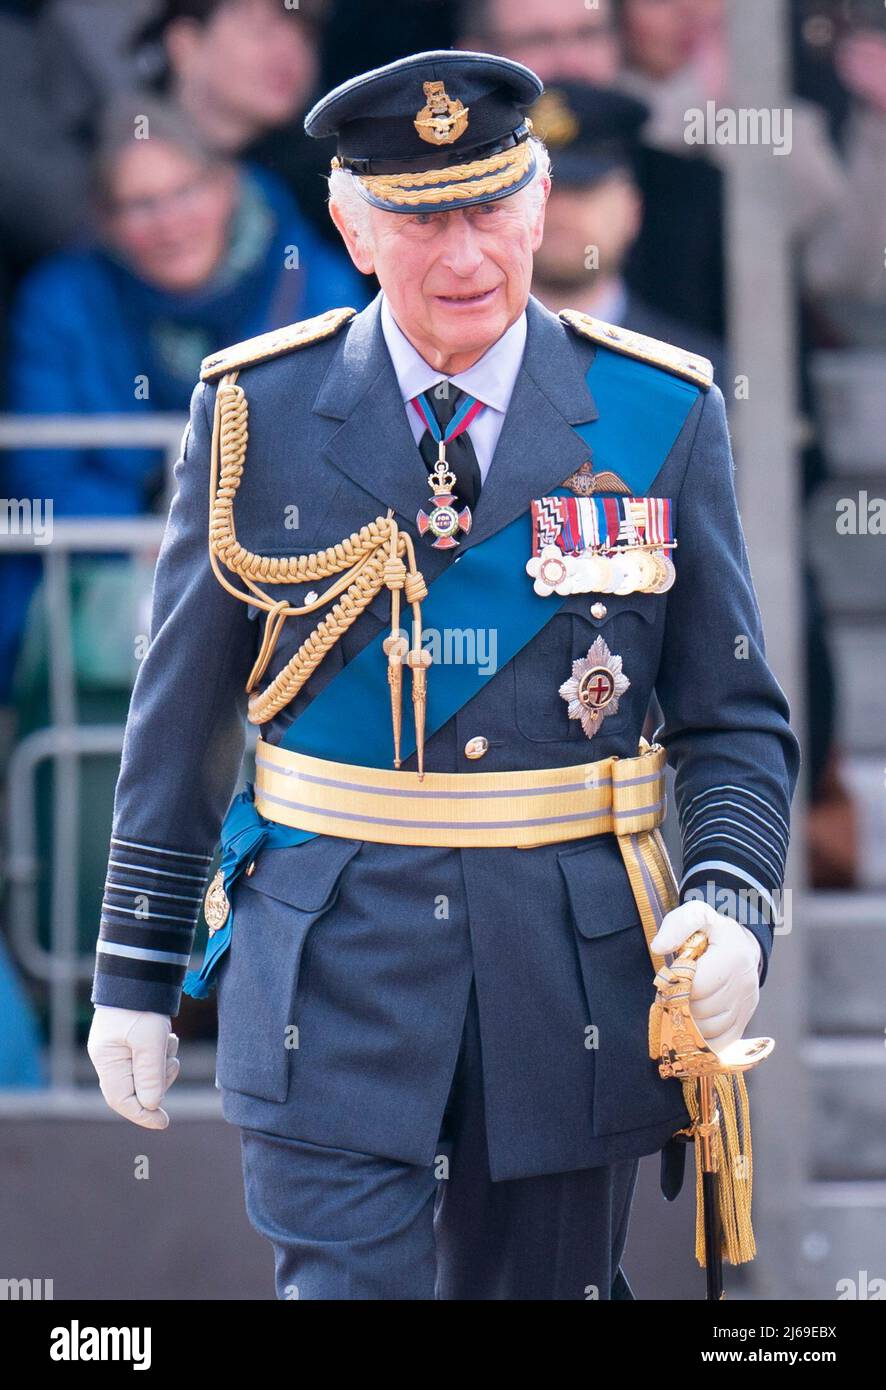 The Prince of Wales, Marshal of the Royal Air Force, attends a parade at RAFC, Cranwell, Sleaford, in Lincolnshire, held for officers and aviators who graduated from RAF Cranwell and RAF Halton during the Covid pandemic without any guests in attendance. Picture date: Friday April 29, 2022. Stock Photo